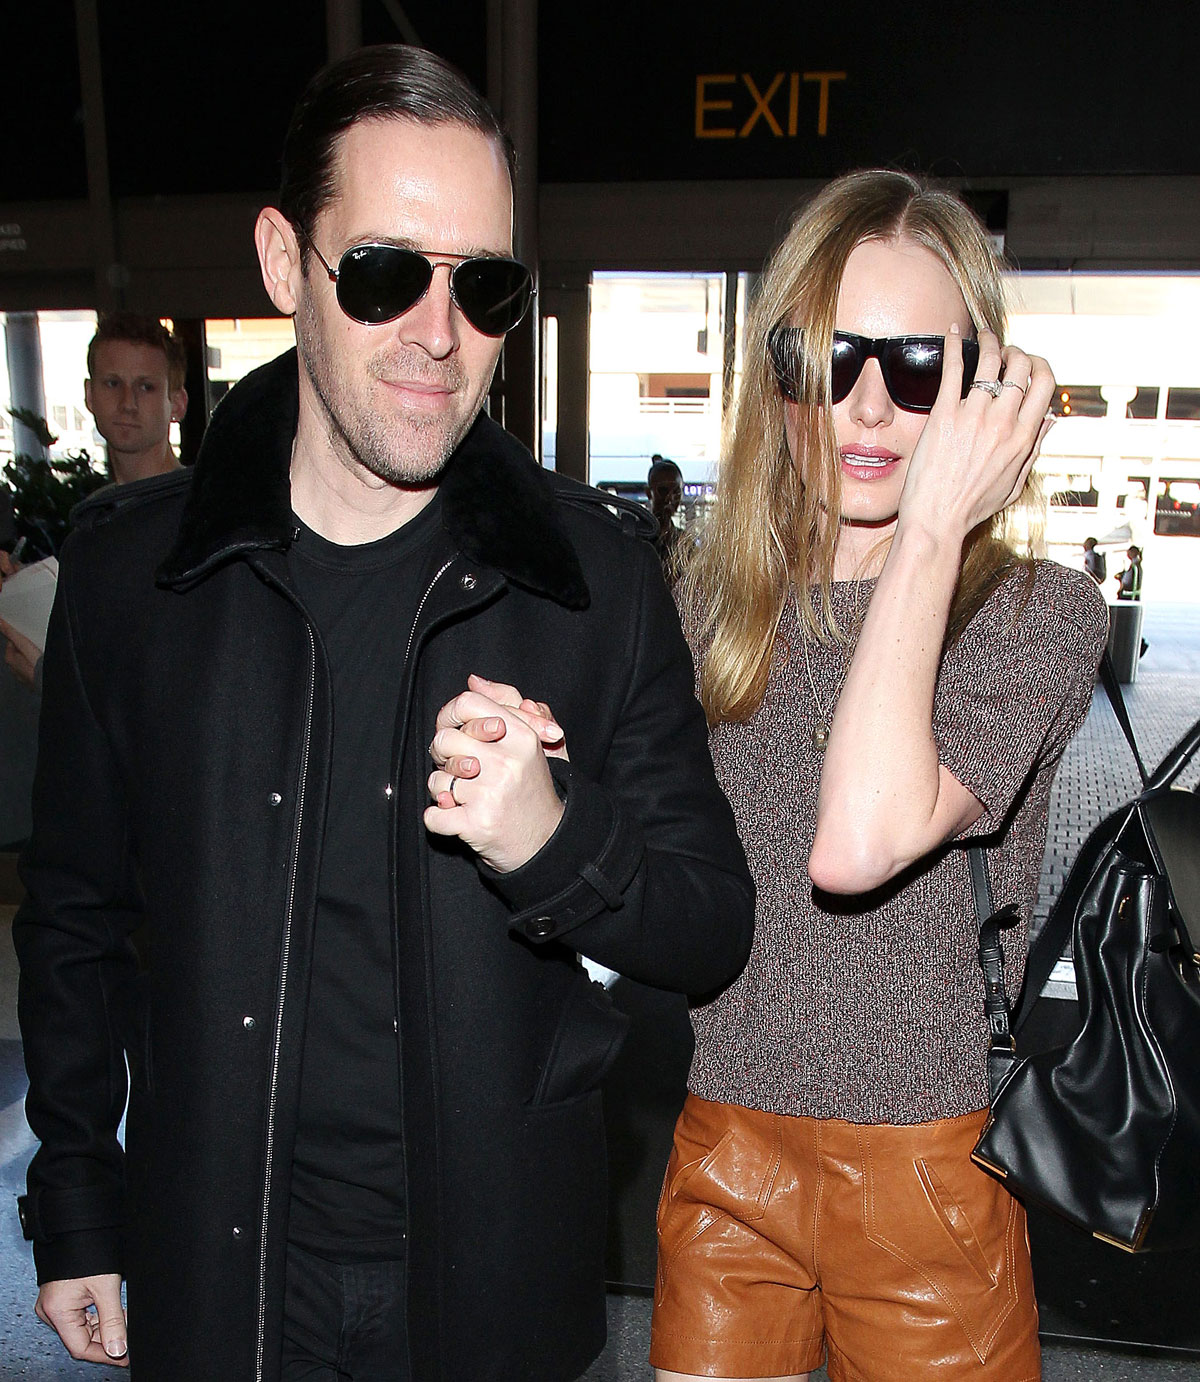 Kate Bosworth departing on a flight at LAX